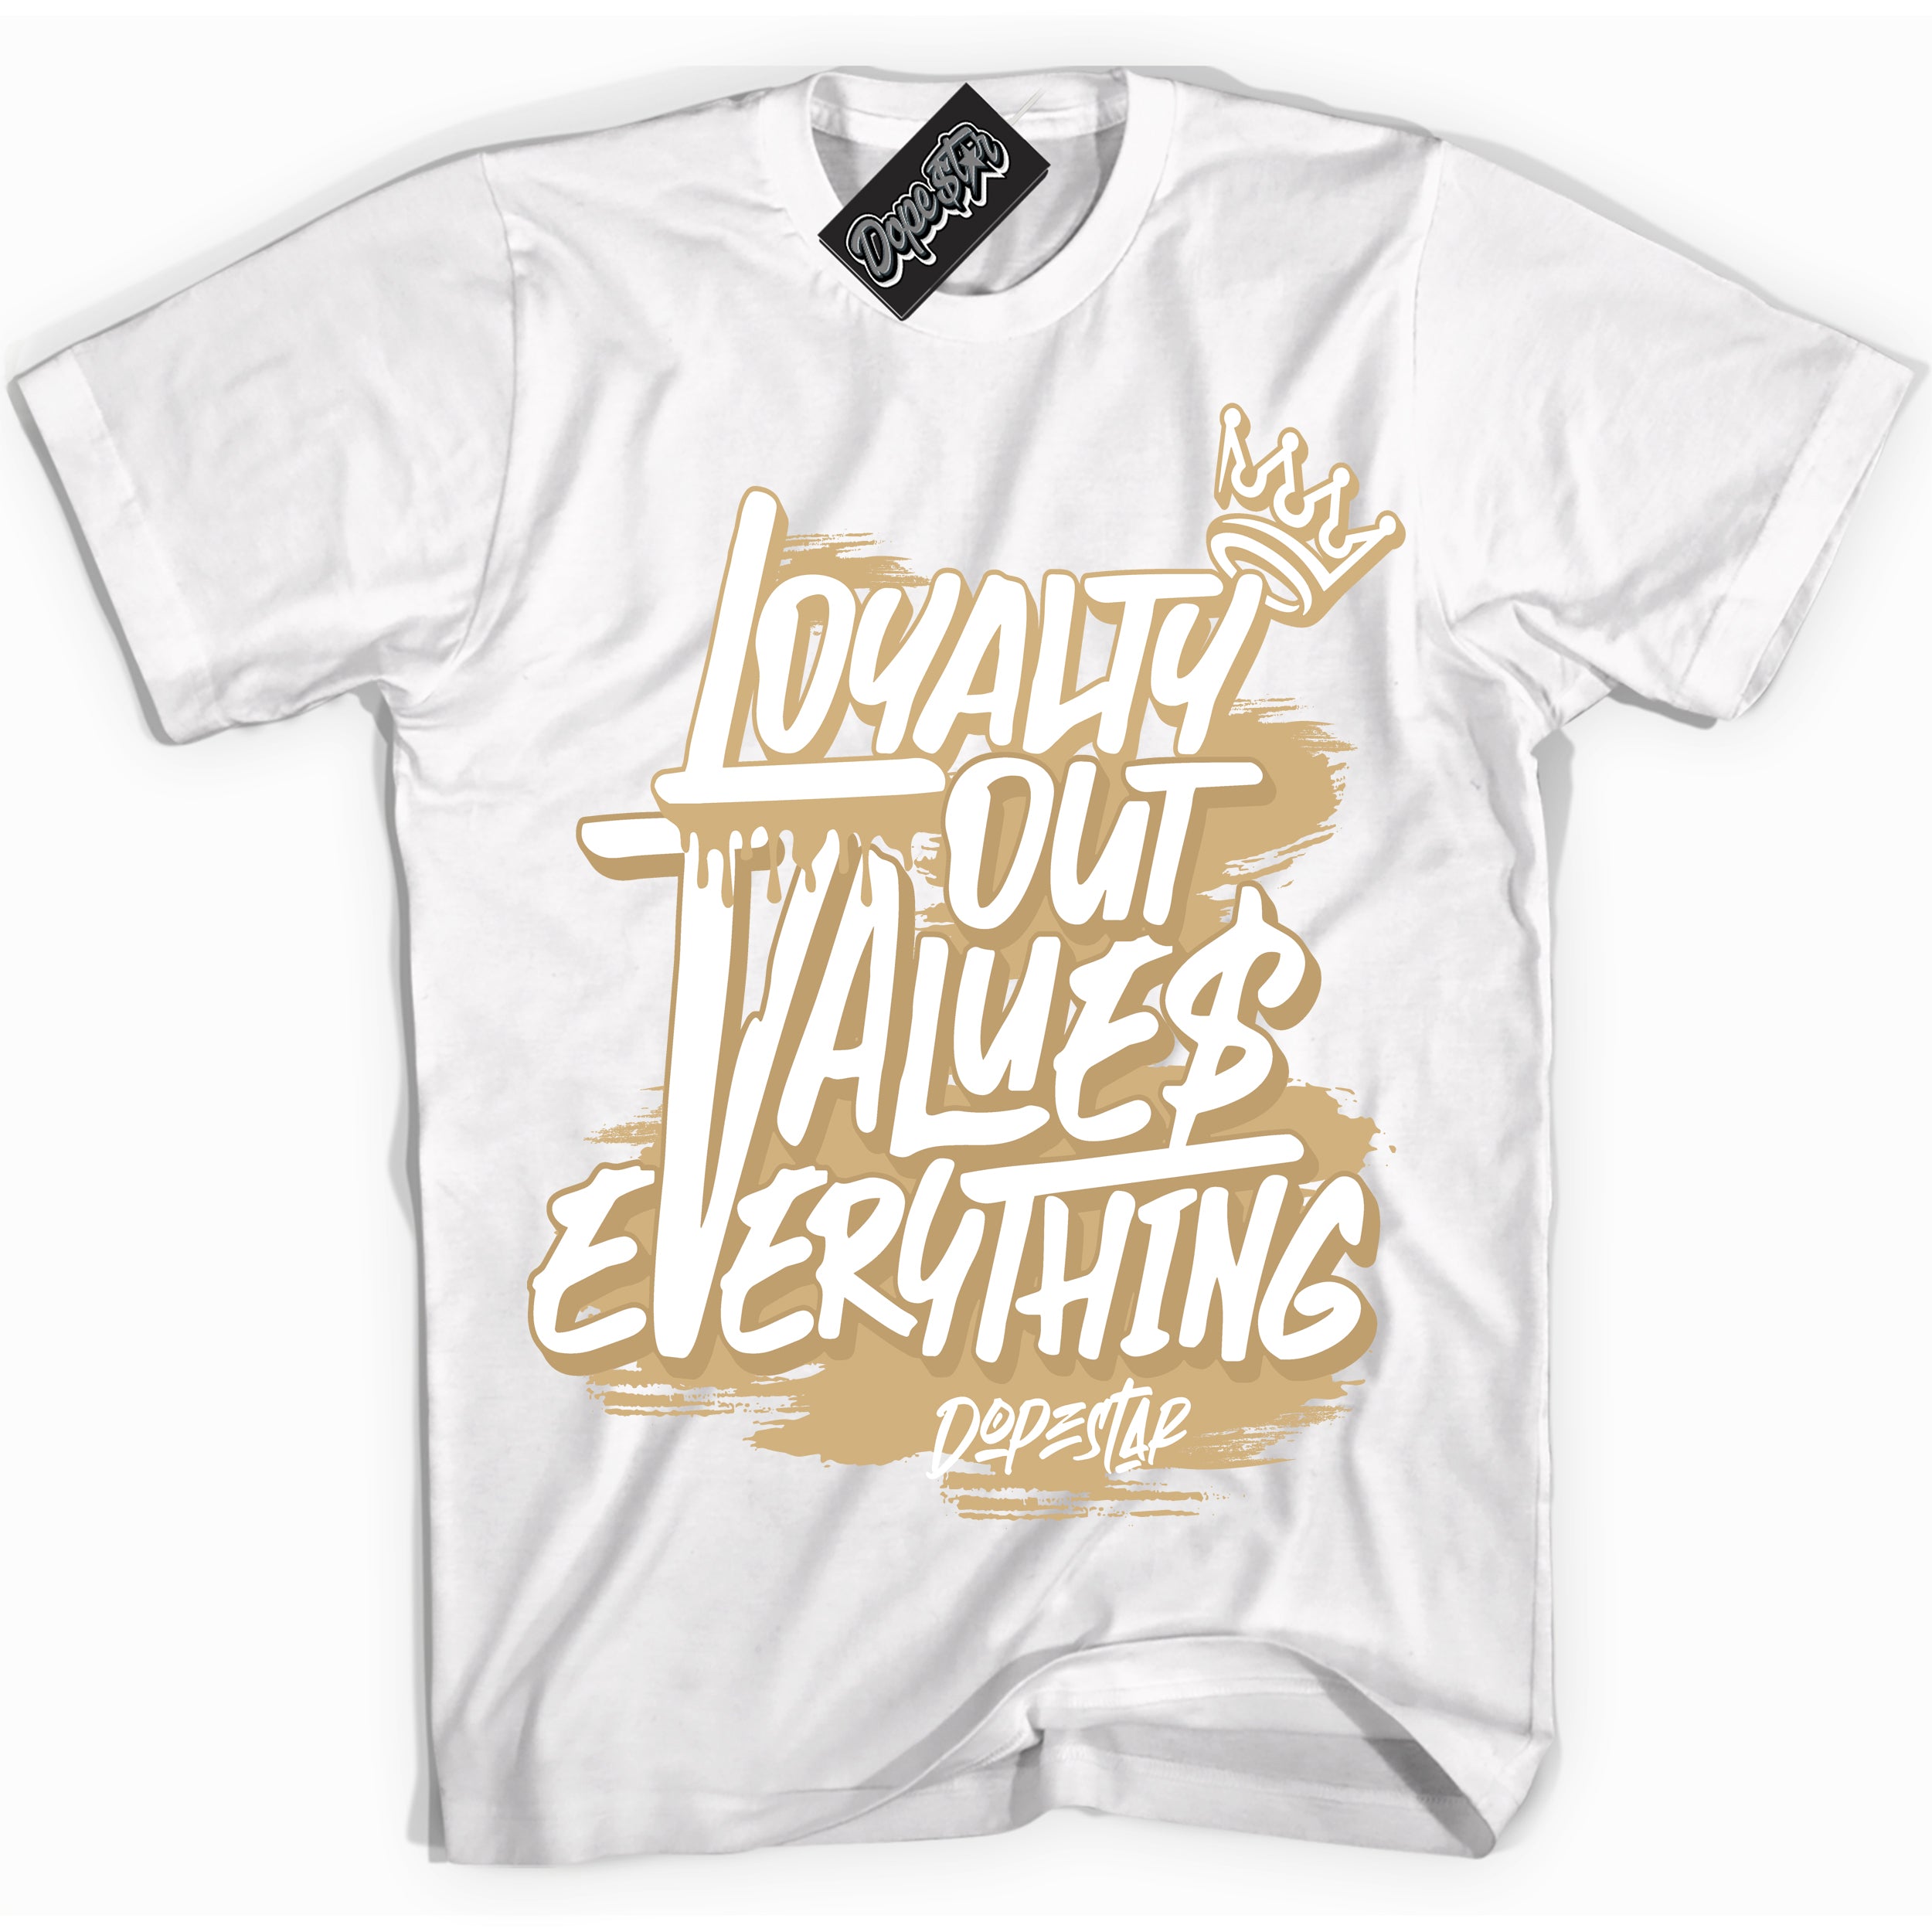 Cool White Shirt with “ Loyalty Out Values Everything” design that perfectly matches Metallic Gold 1s Sneakers.